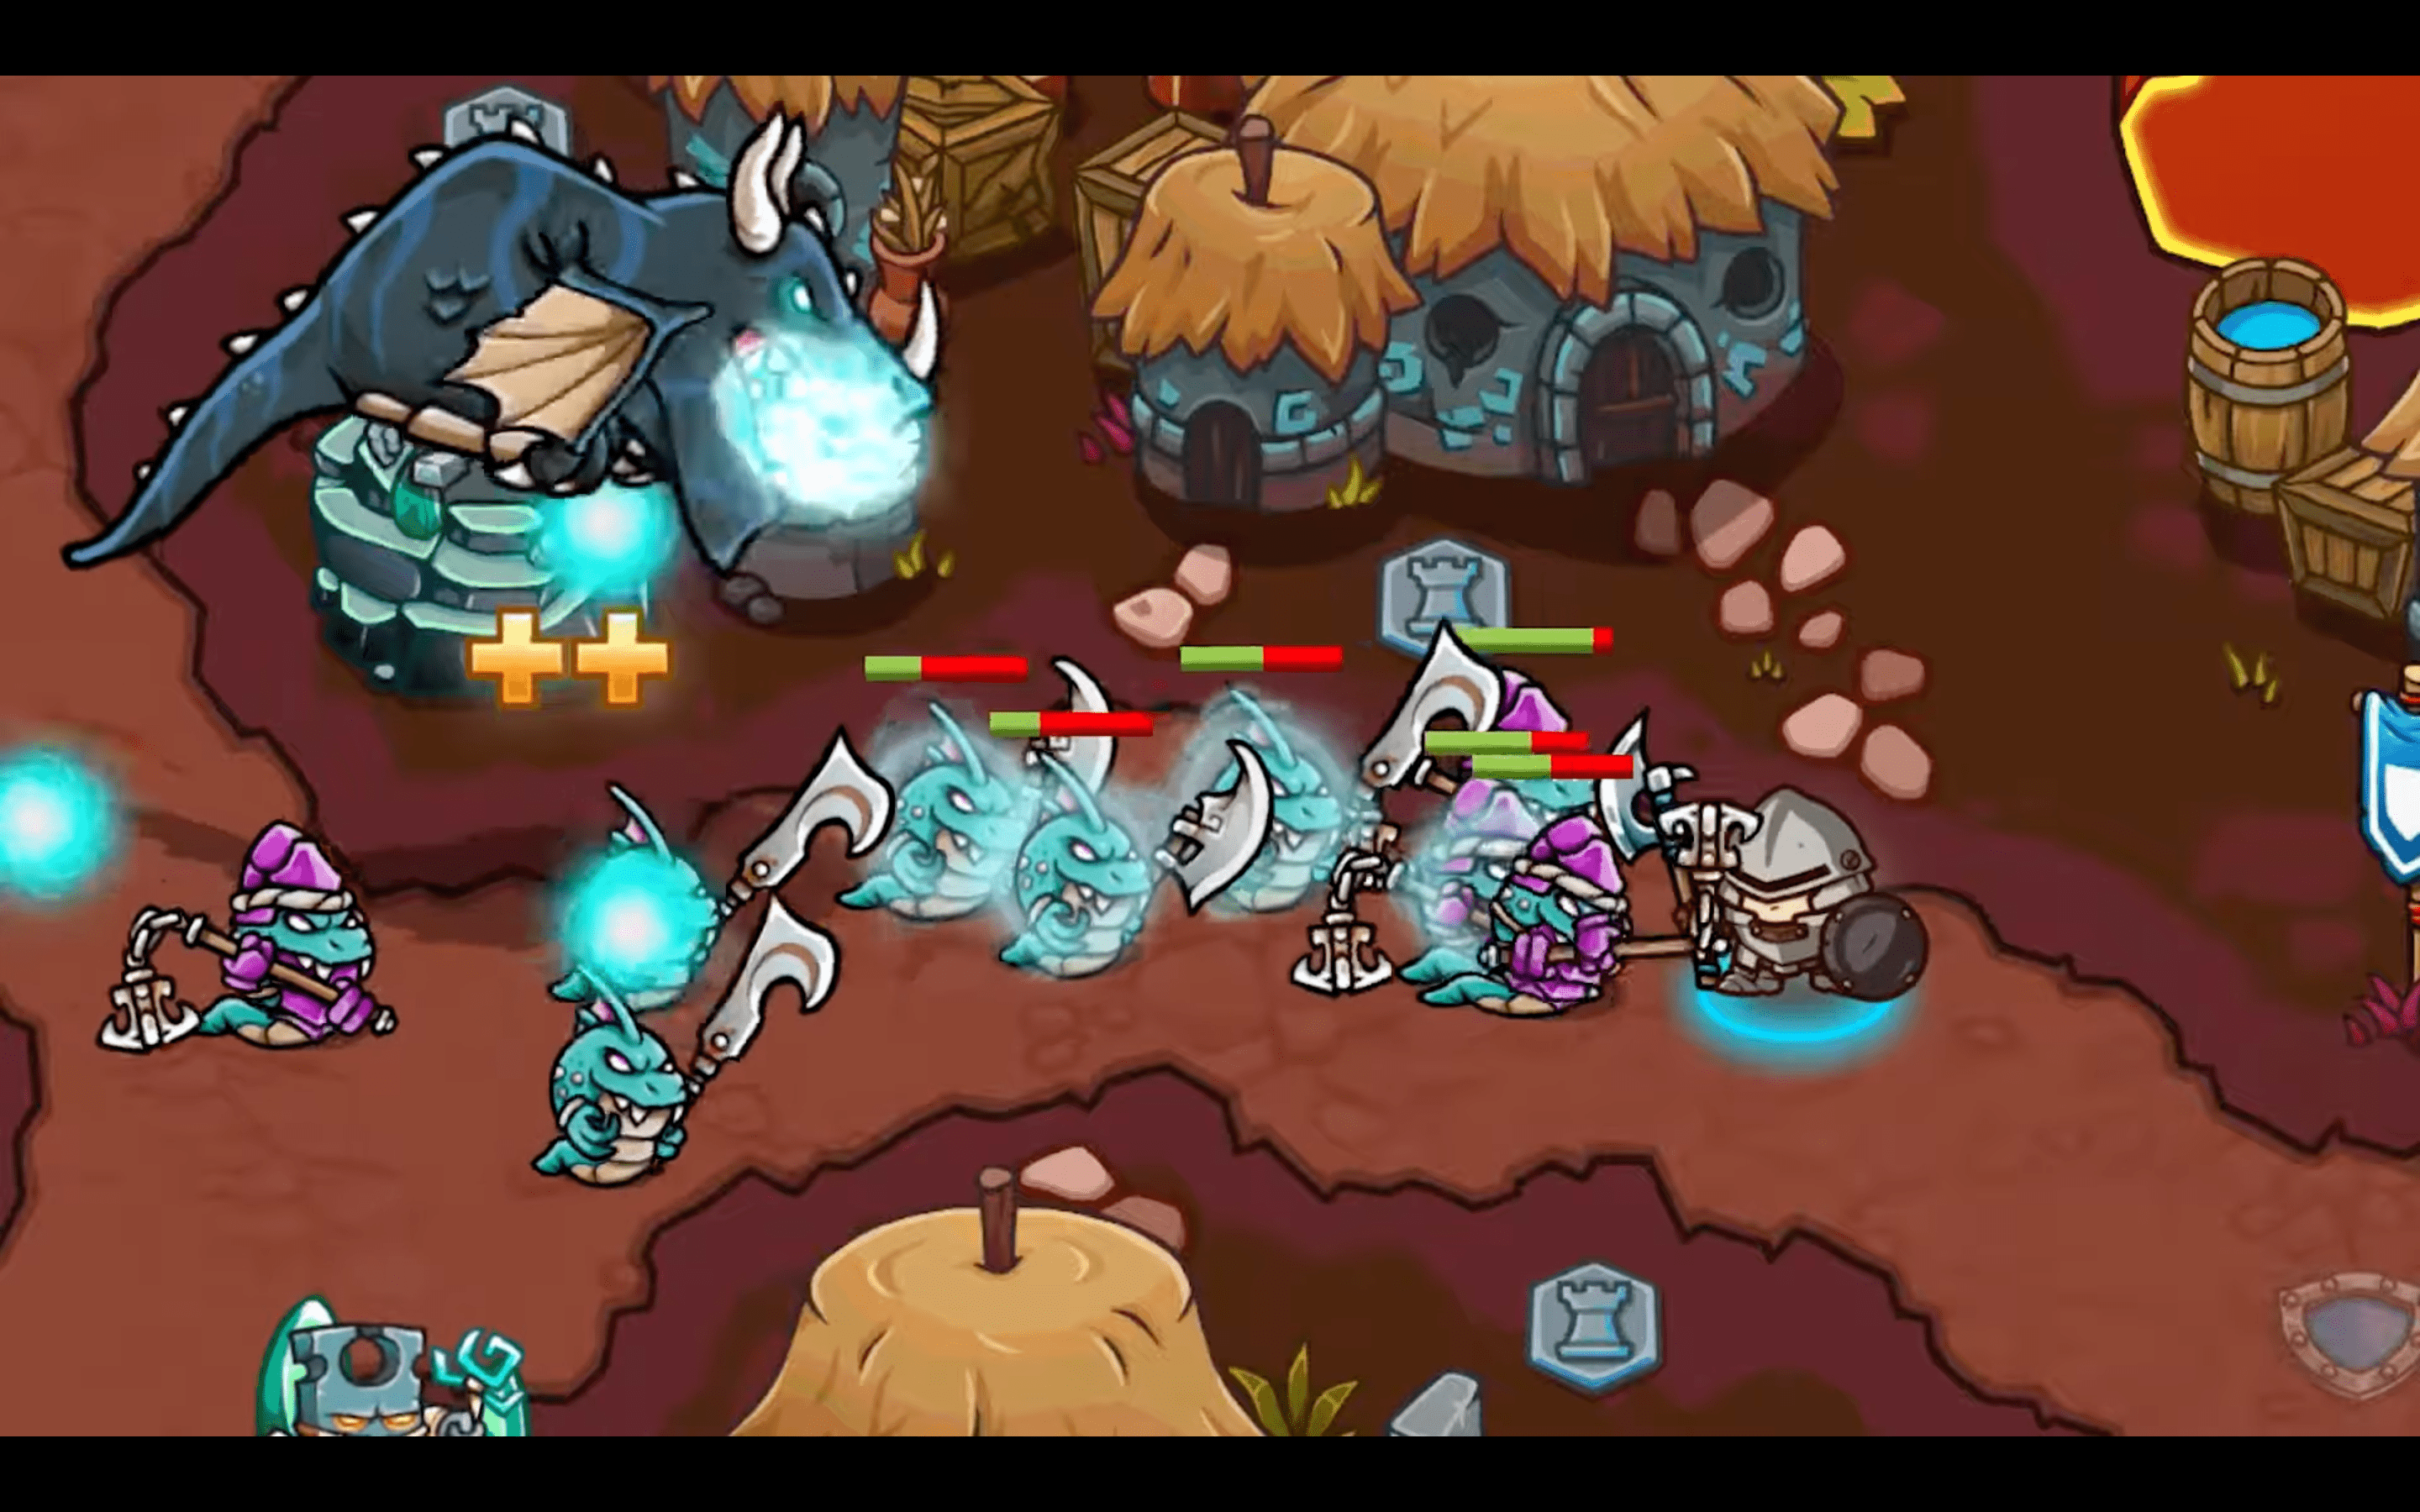 Crazy Kings Tower Defense 2D 2022! Satisfying Tower Defense Game in 2022! 